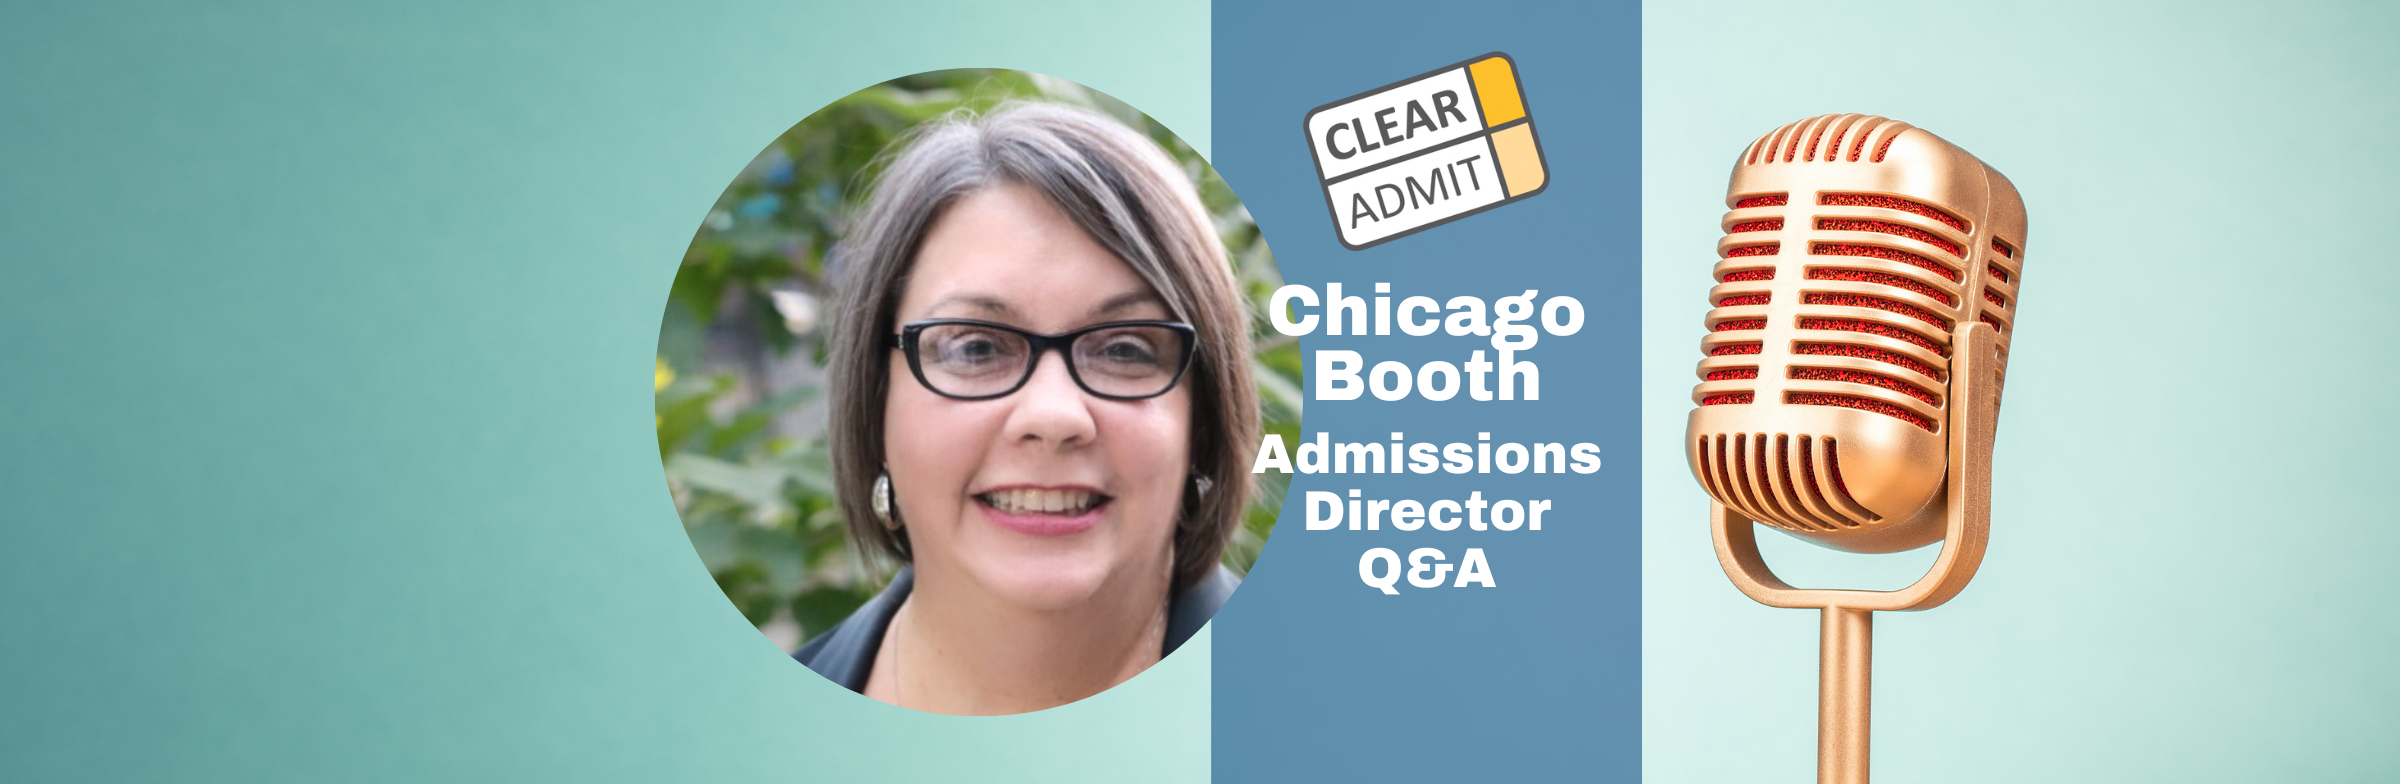 Image for Admissions Director Q&A: Donna Swinford of Chicago Booth